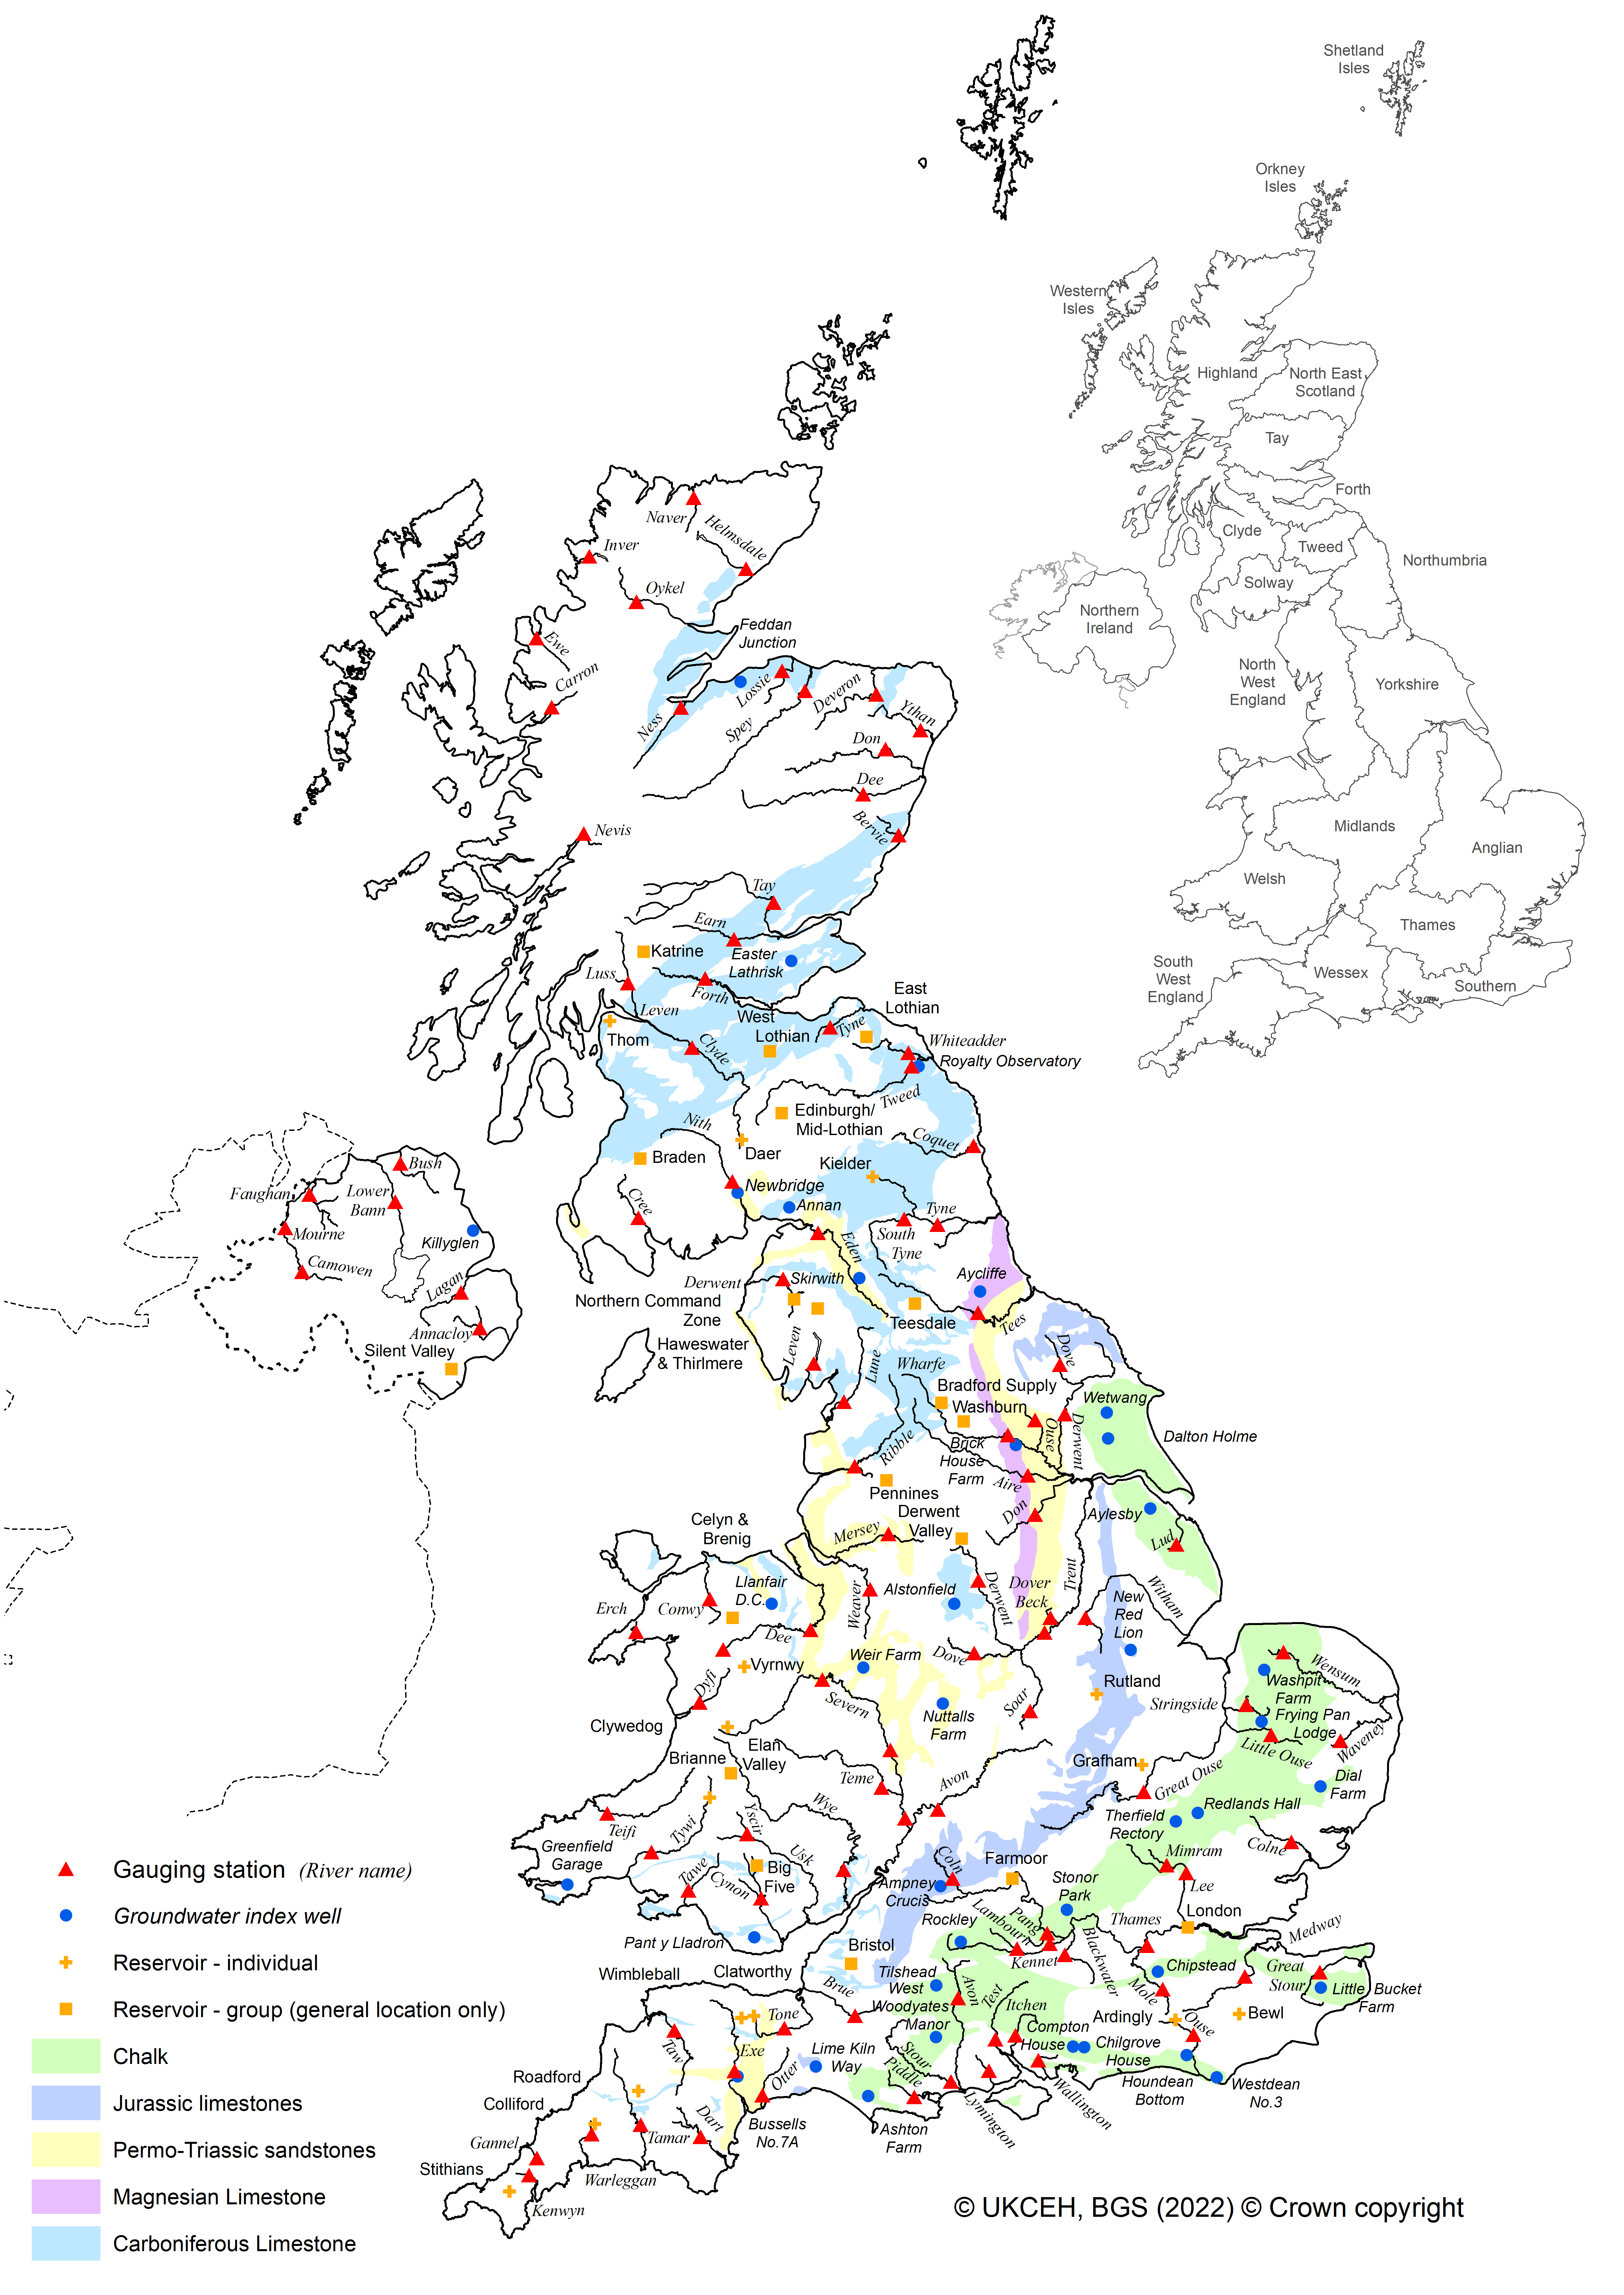 Map of the UK showing the sites used in the UK Hydrological Summary